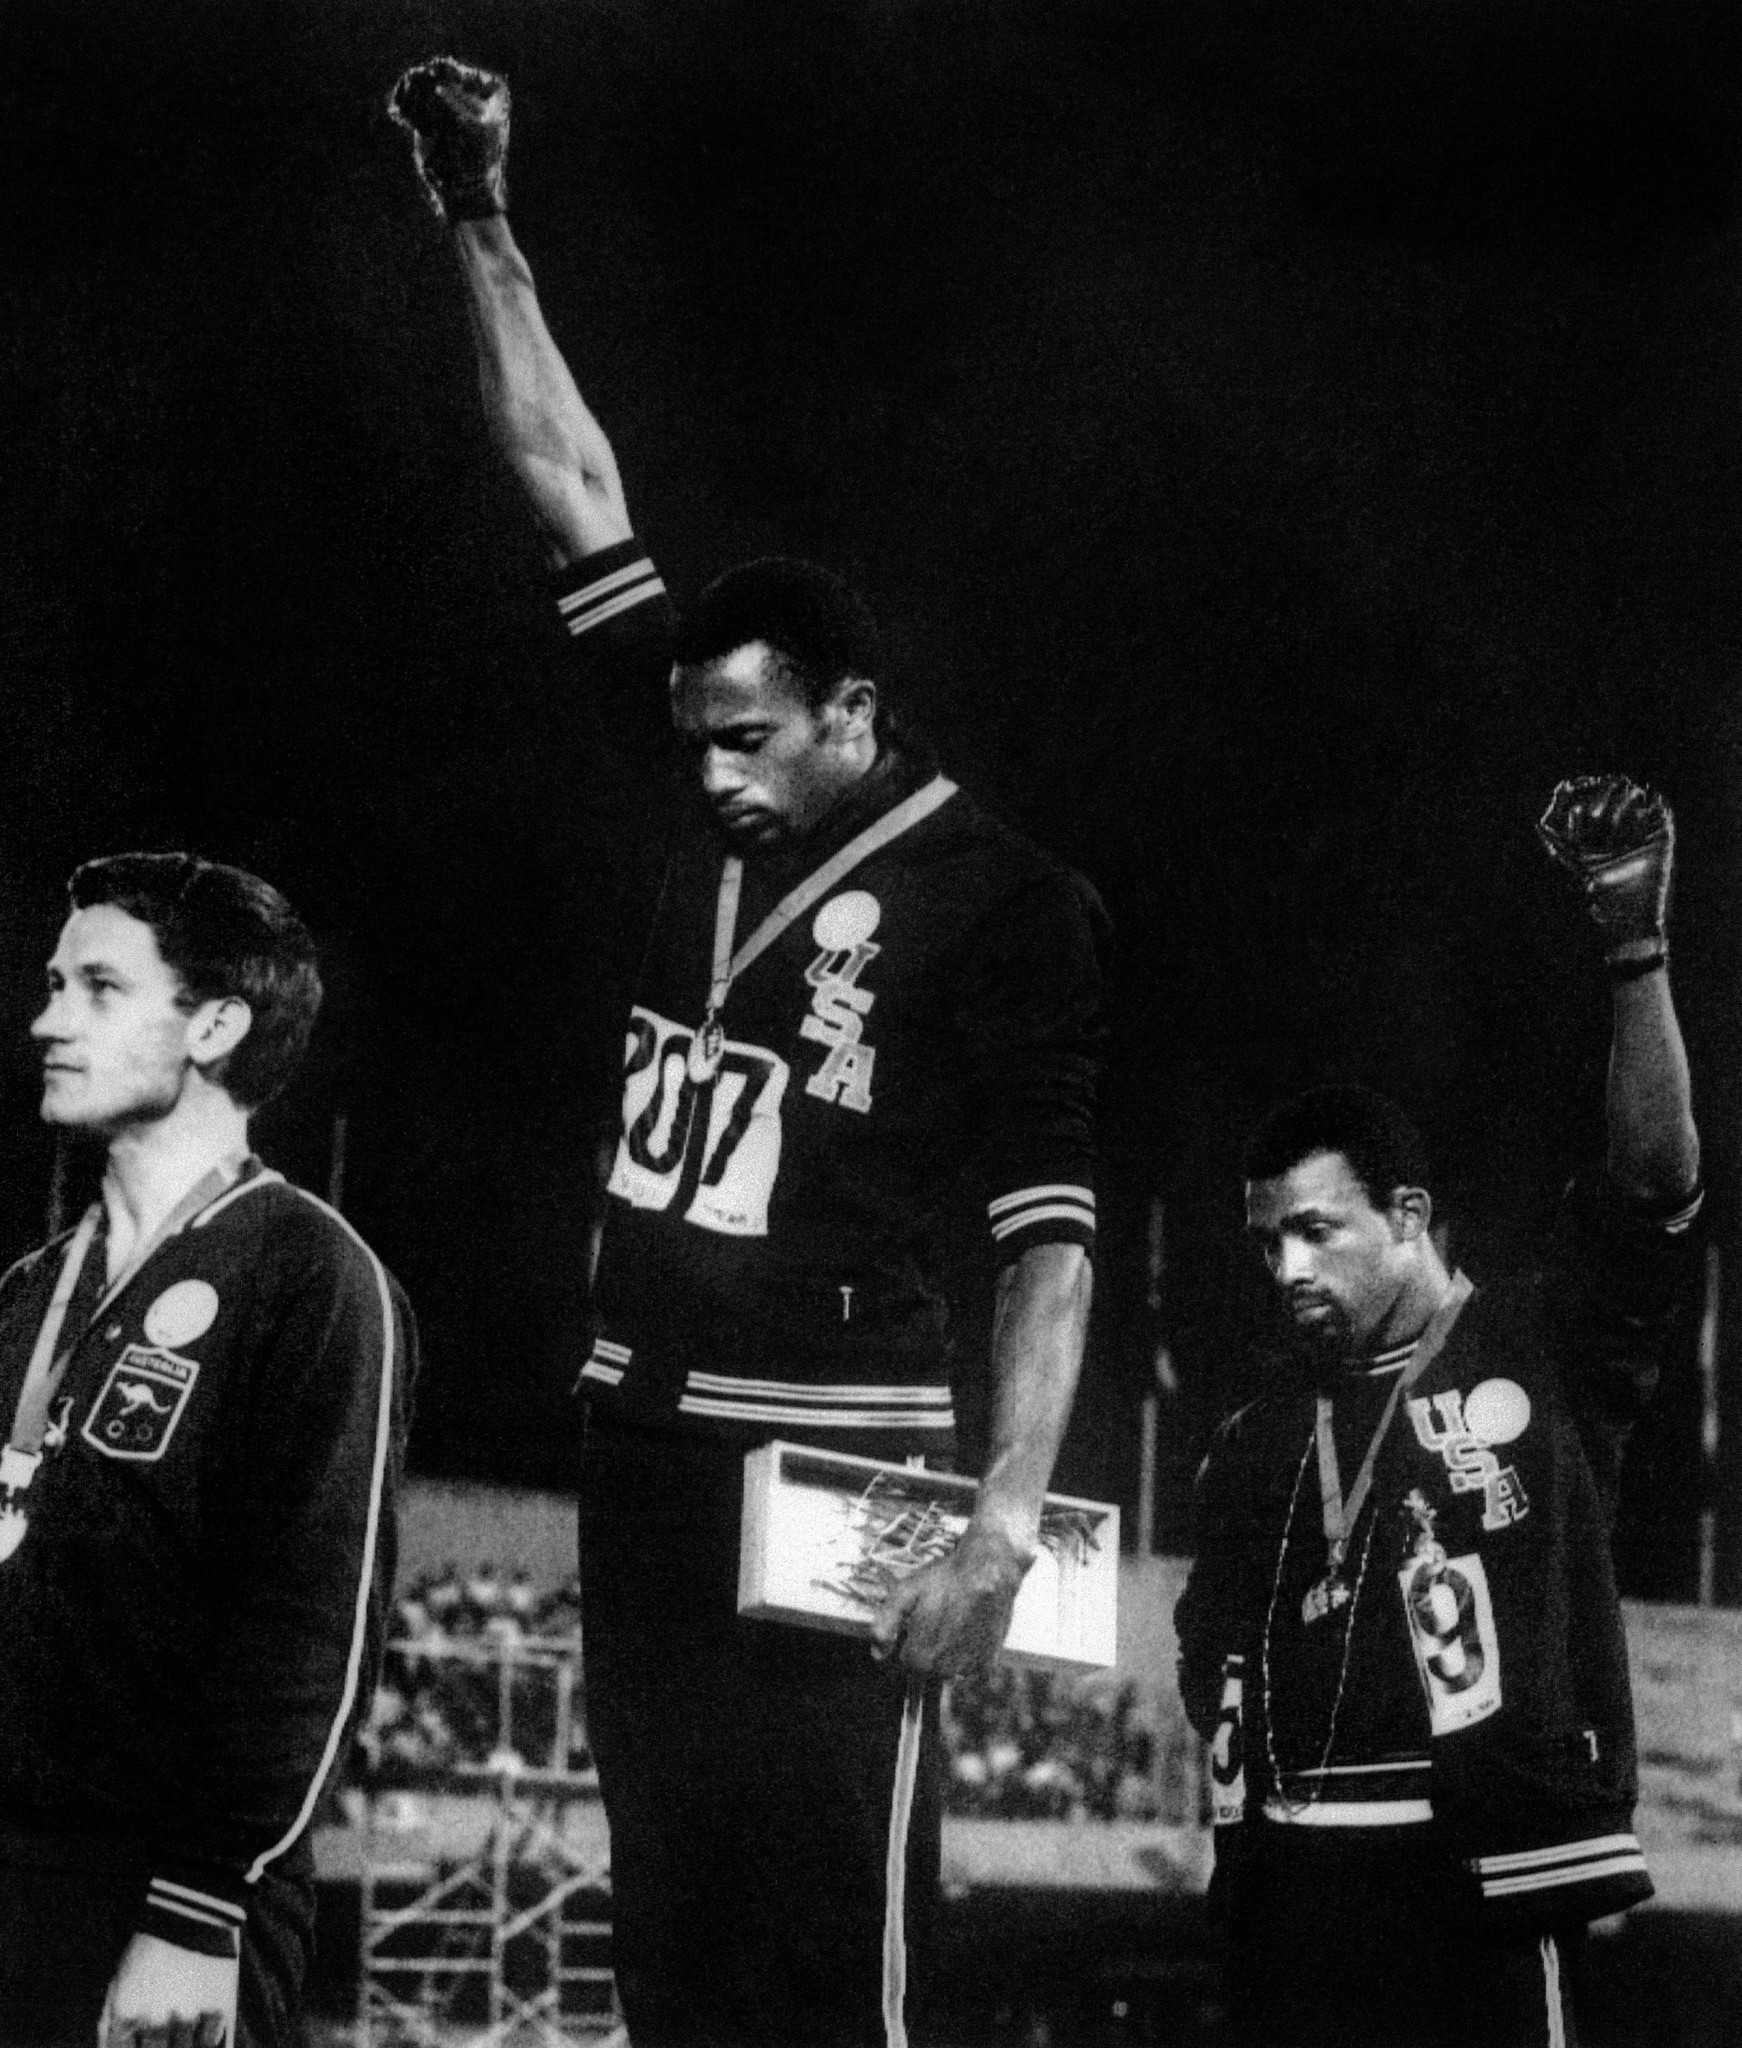 The archetypal sporting political protest – Tommie Smith and John Carlos raise black-gloved fists during the 200m medal ceremony at the 1968 Mexico City Olympics ©Getty Images